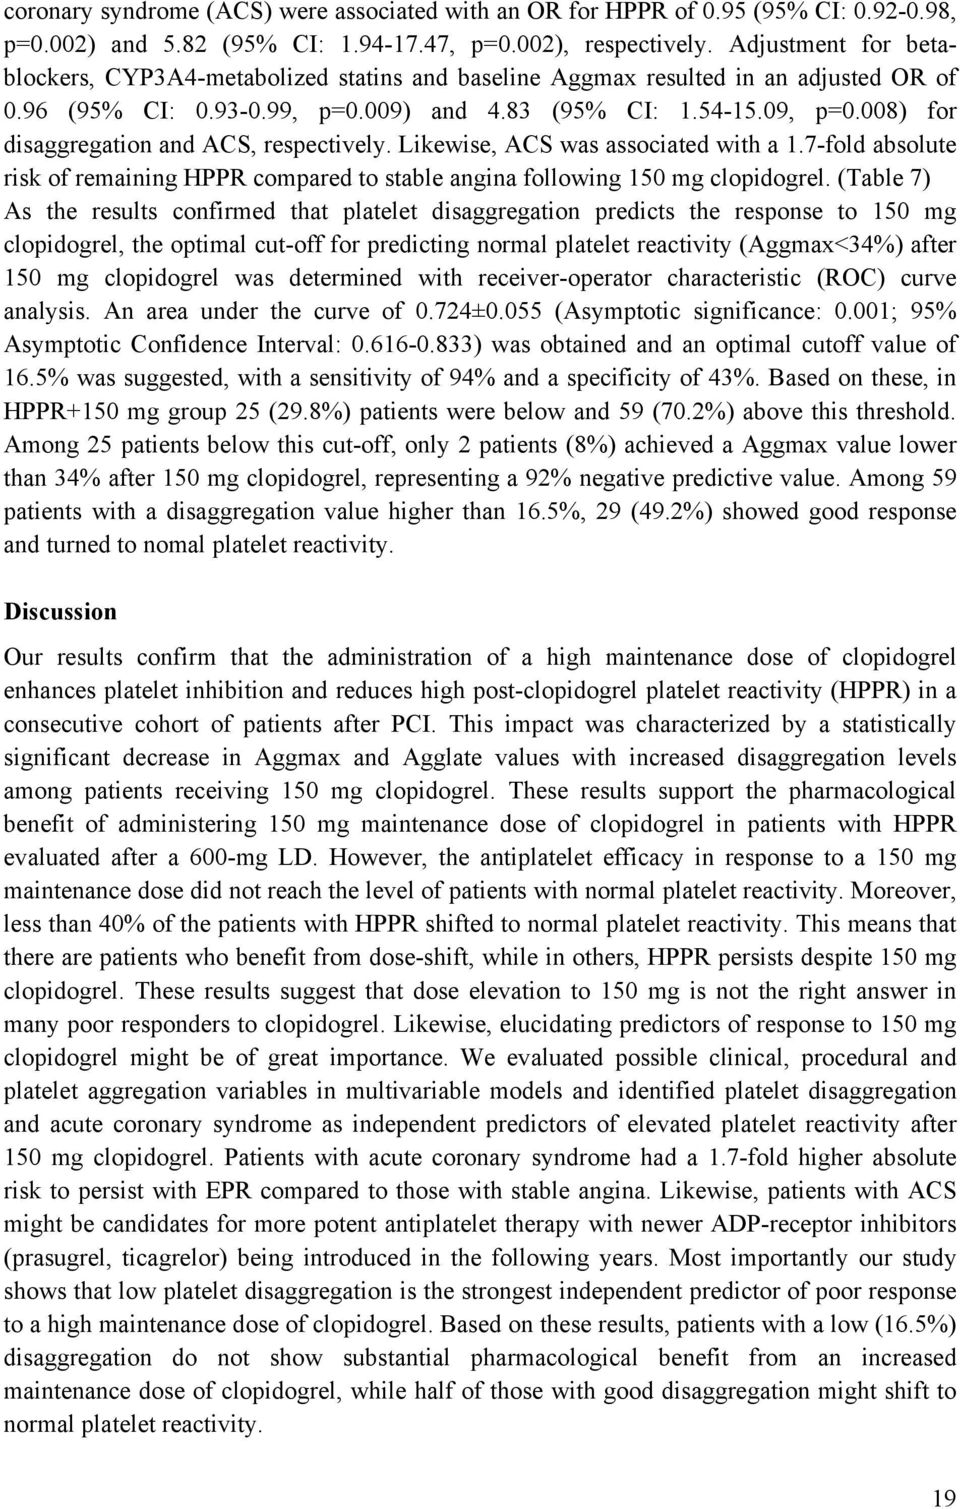 008) for disaggregation and ACS, respectively. Likewise, ACS was associated with a 1.7-fold absolute risk of remaining HPPR compared to stable angina following 150 mg clopidogrel.